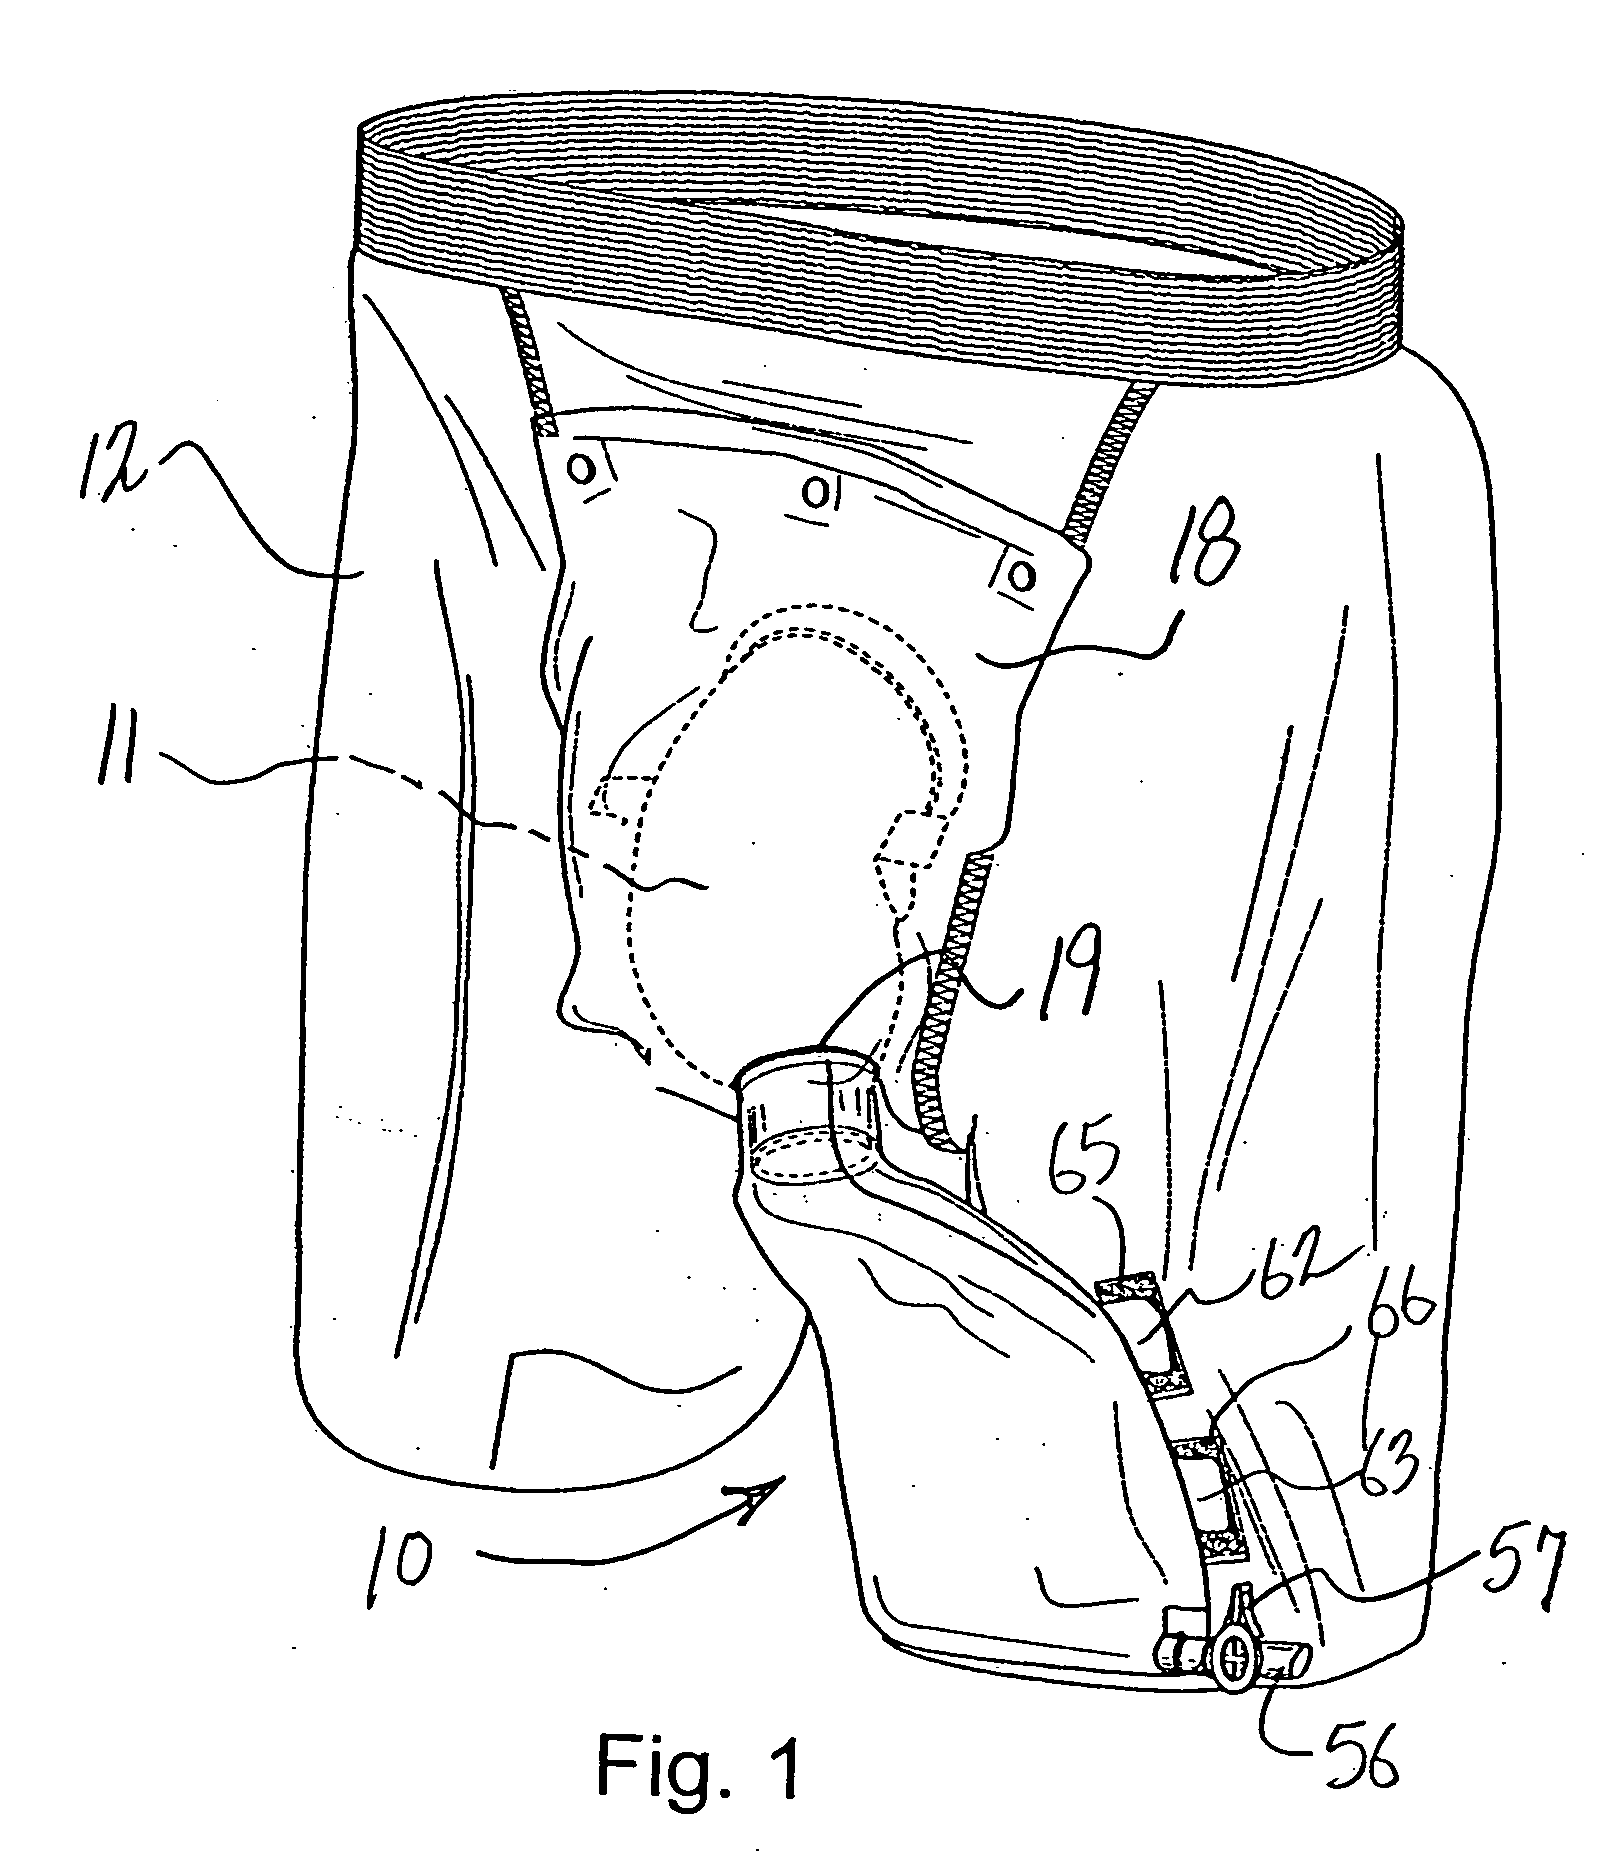 Collection bag adapted for use in an incontinence management system